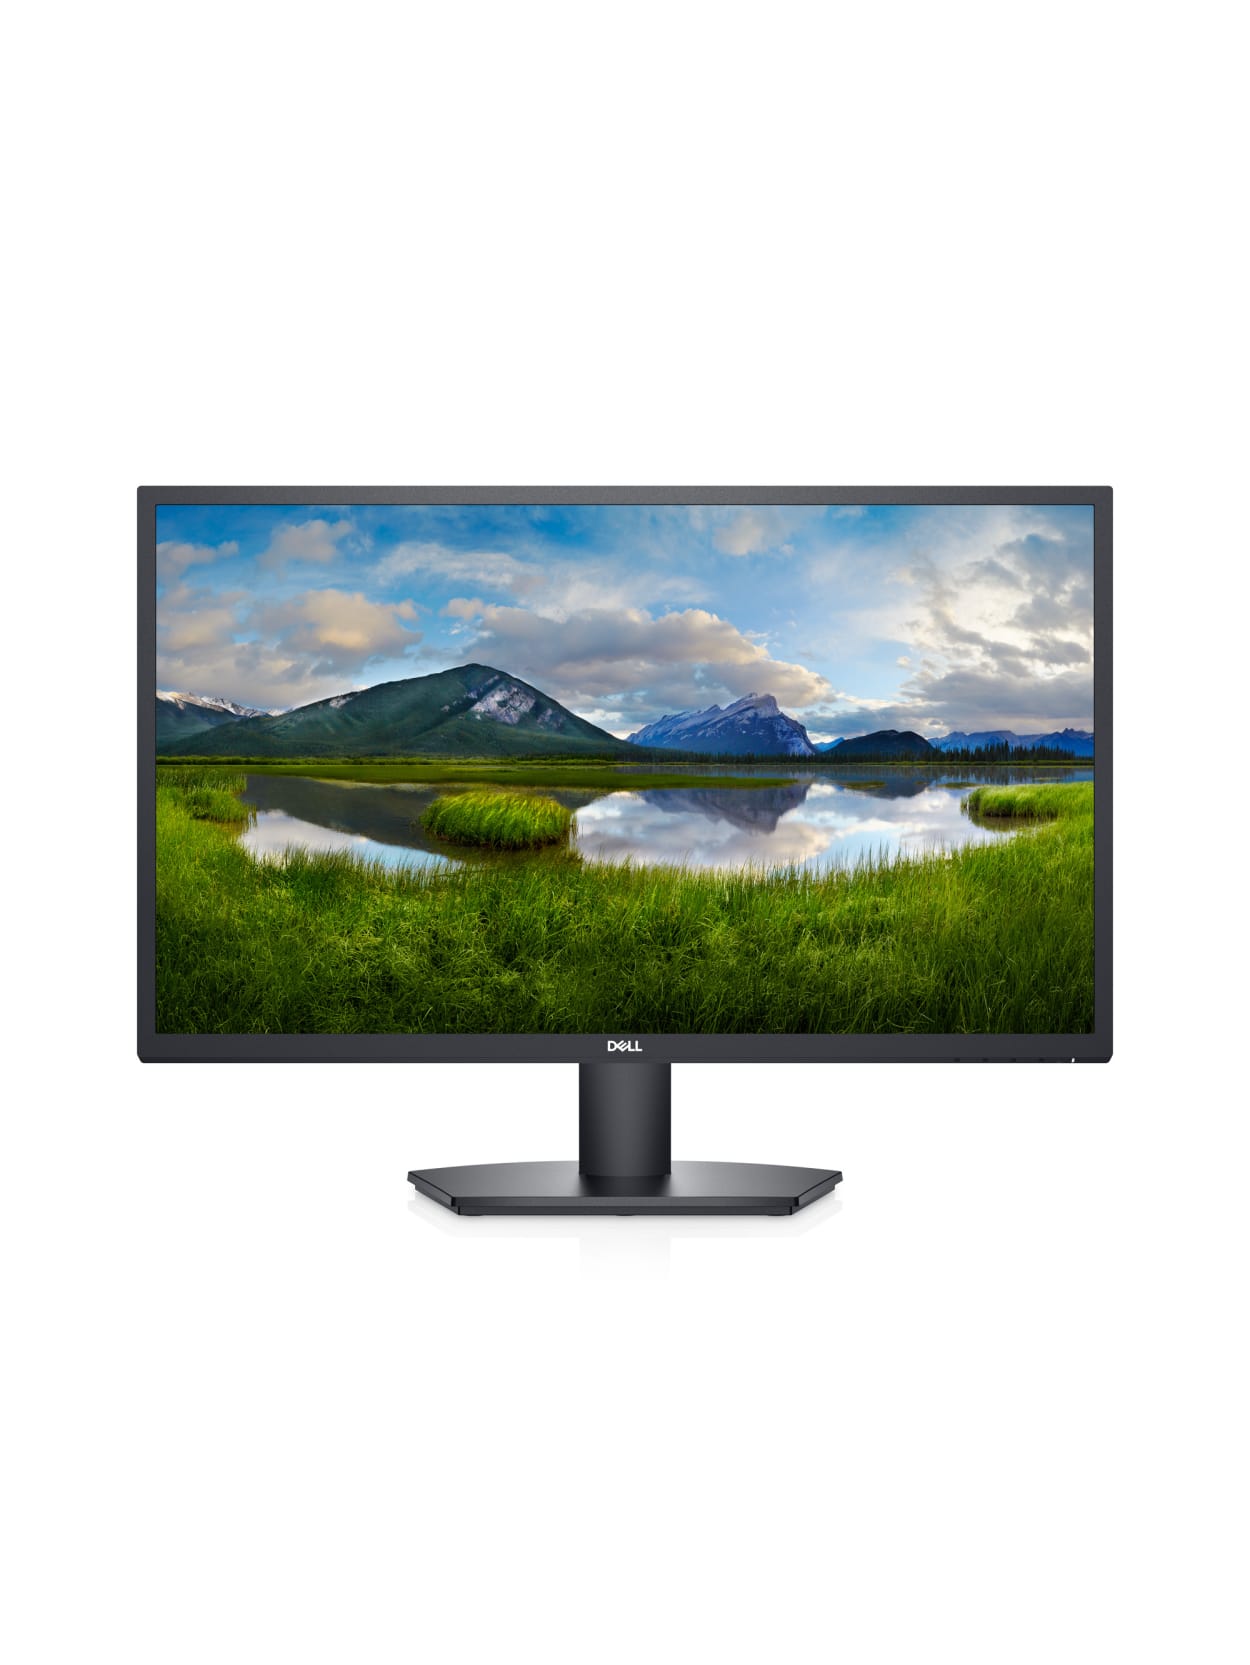 Dell™ SE2722H 27" FHD LED Monitor $129.99 @ Office Depot